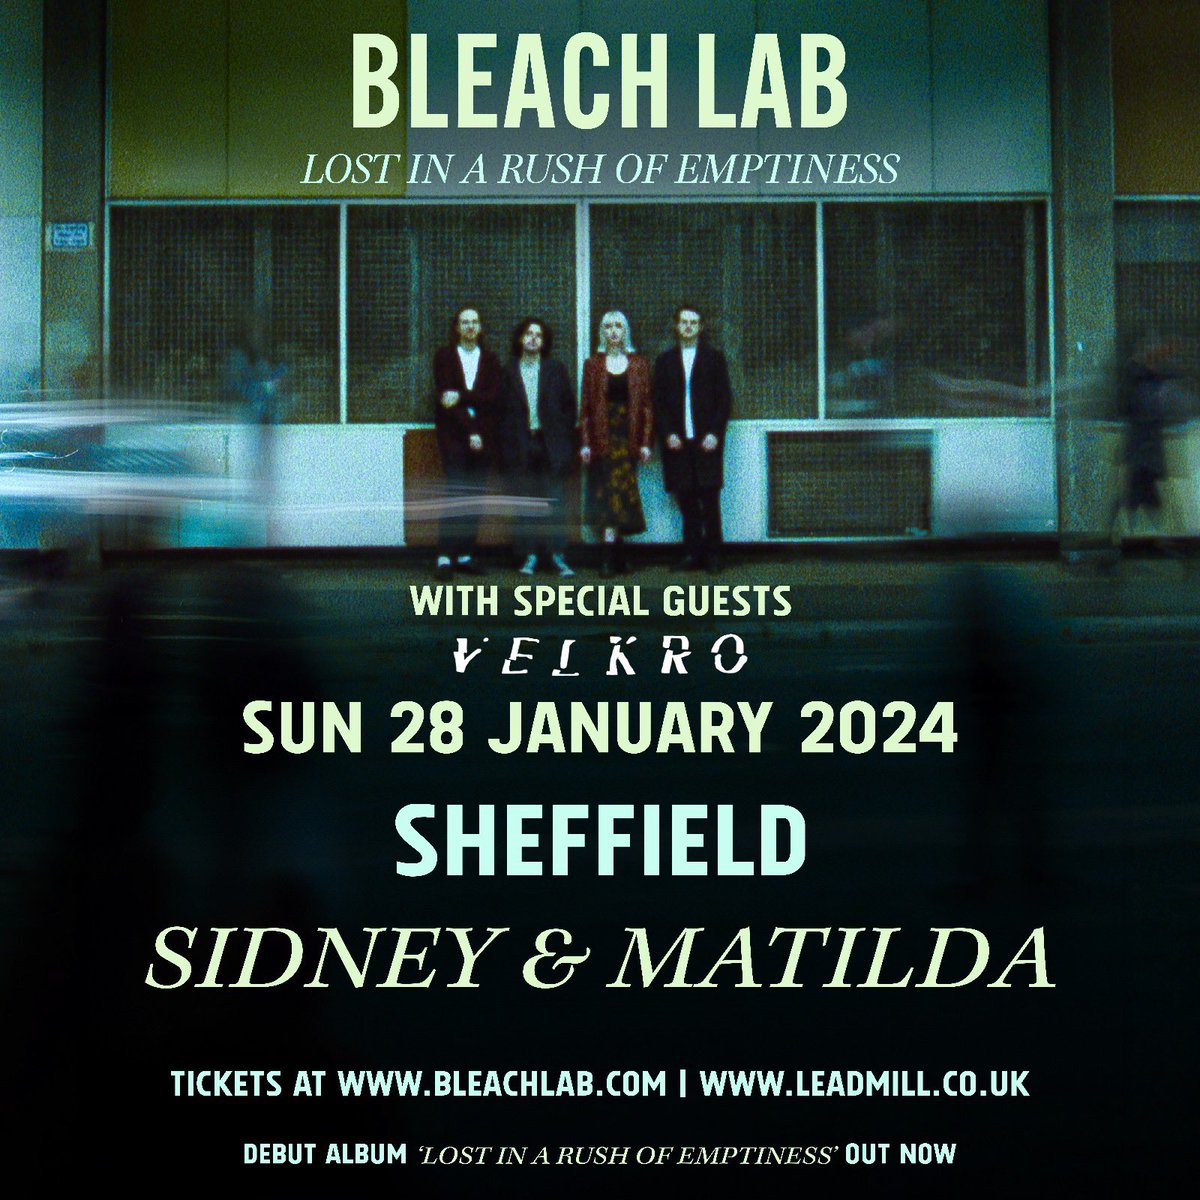 Sheffield! We are very excited to announce we’ll be joining our good friends @bleach_lab at @sidneymatilda next Sunday evening. You’d be a fool to miss this one, grab a ticket at the link in our bio 💙 More to come…